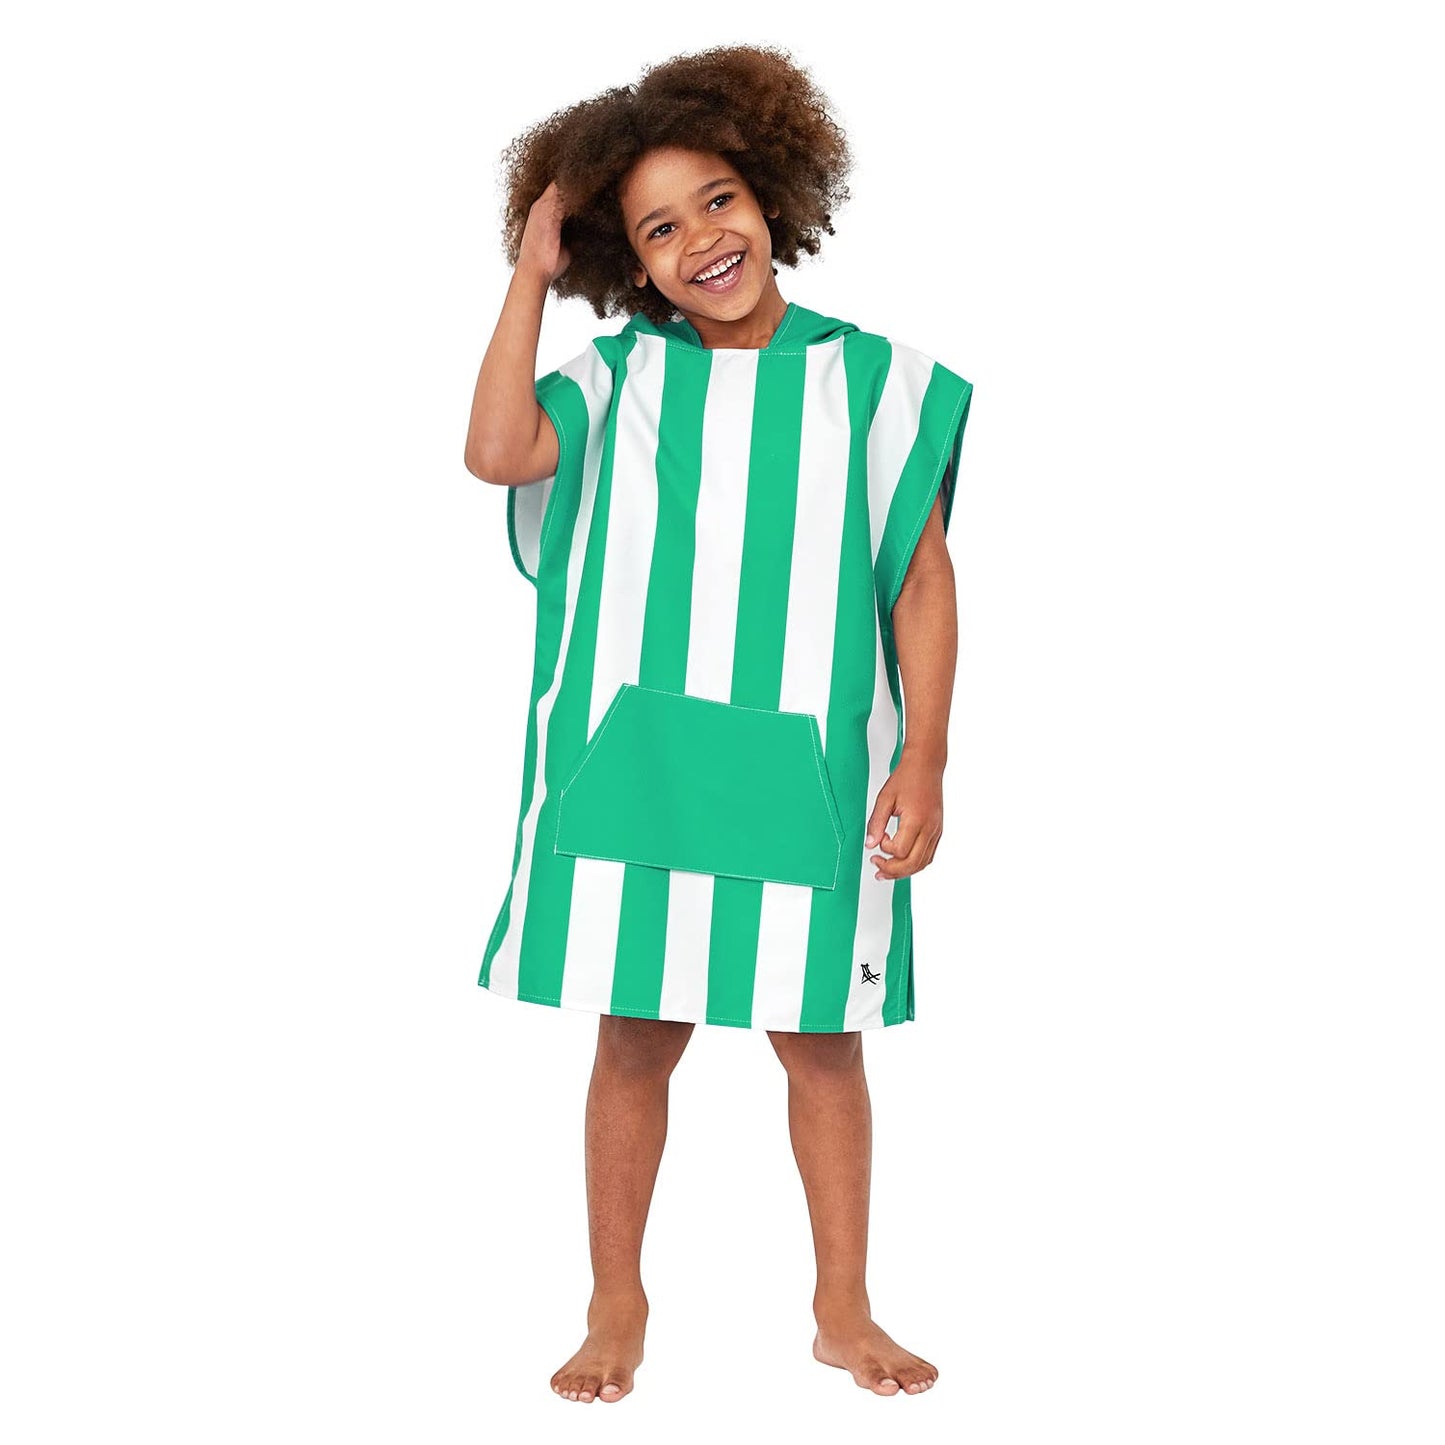 Dock & Bay Poncho with Hood  for Kids Ages 4-7 - Super Absorbent, Quick Dry - Includes Bag - Cabana - Cancun Green, Small (Age 4-7) - Opticdeals